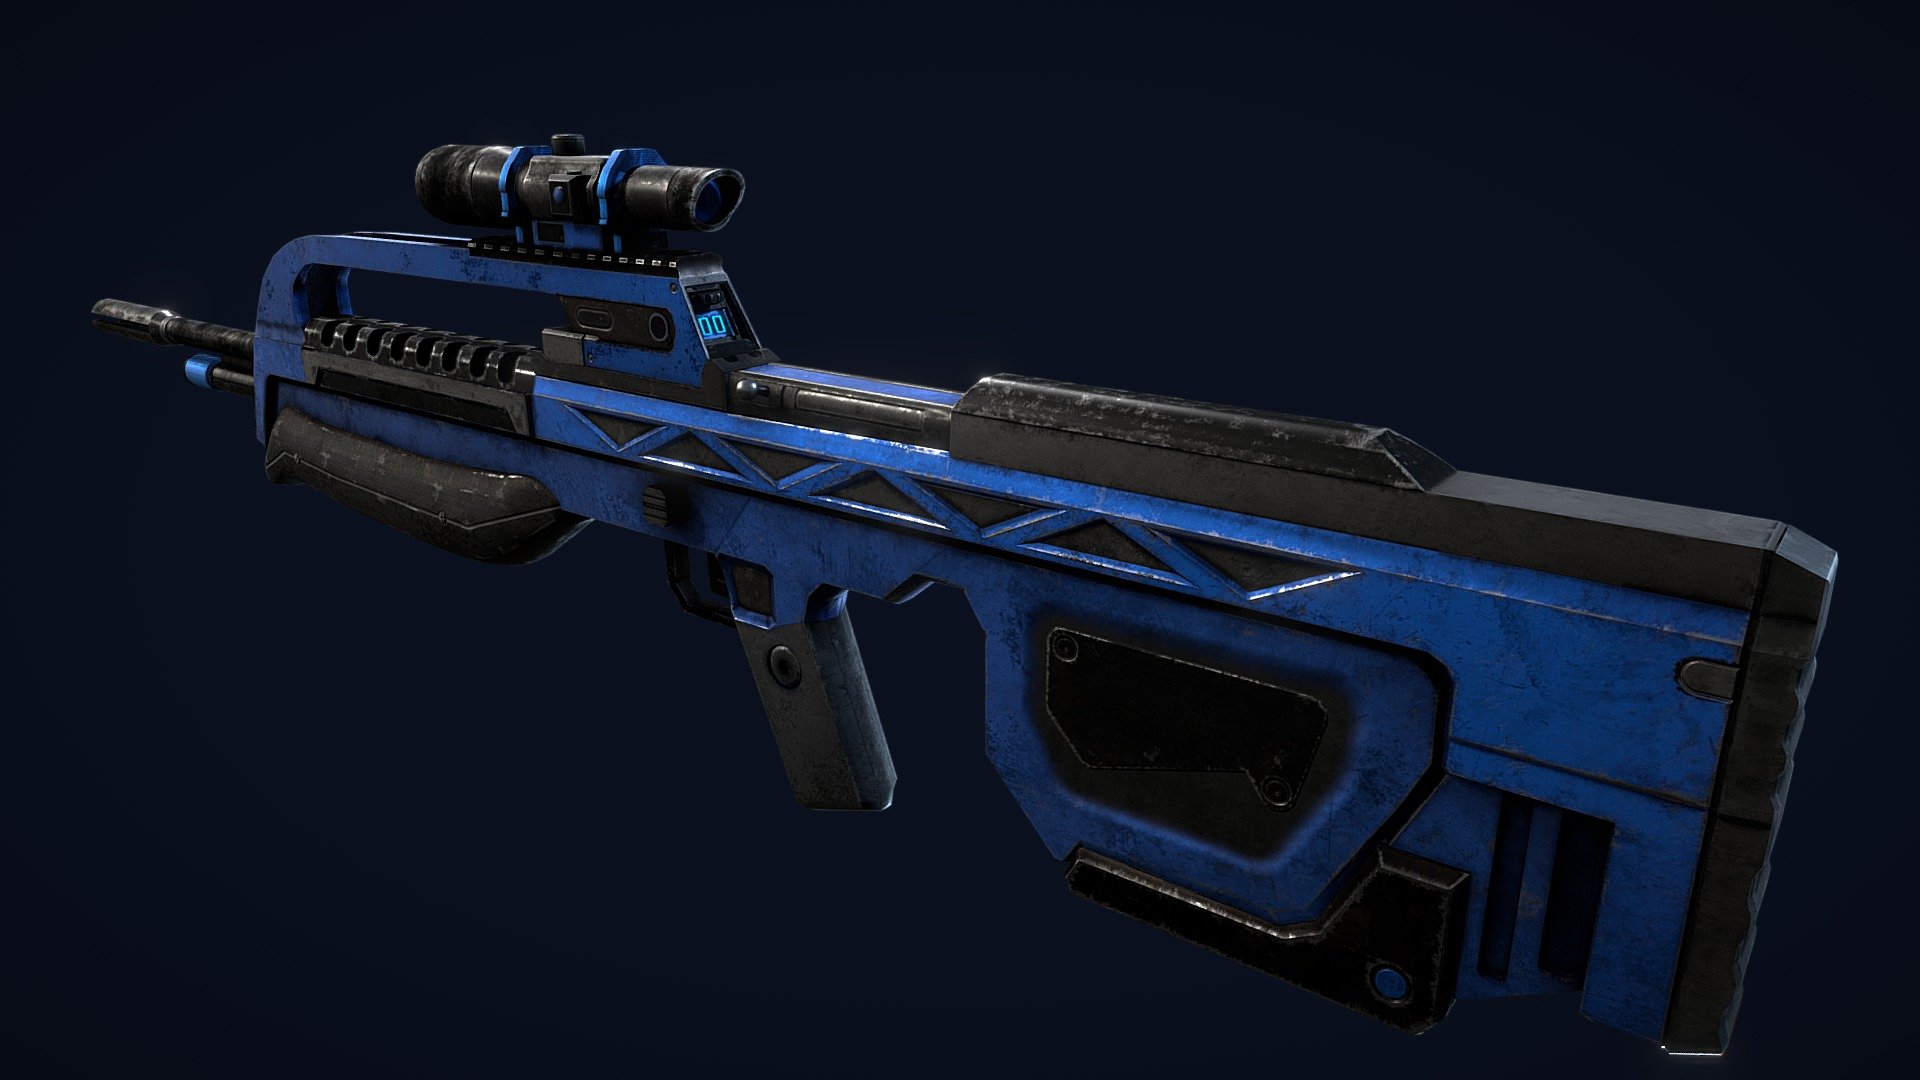 Classic version: https://skfb.ly/ounBJ

This is just something I made for fun, because blue is my favorite color!

I might make more skins for this BR soon, if anyone has any ideas feel free to share!

Modeled in Blender, textured in Substance Painter.

Free to use. Enjoy!

ArtStation post: https://www.artstation.com/artwork/d0PwwJ

(Animation here is just to showcase the model) - Halo - Battle Rifle (Blue skin) - Download Free 3D model by Glitch5970 3d model